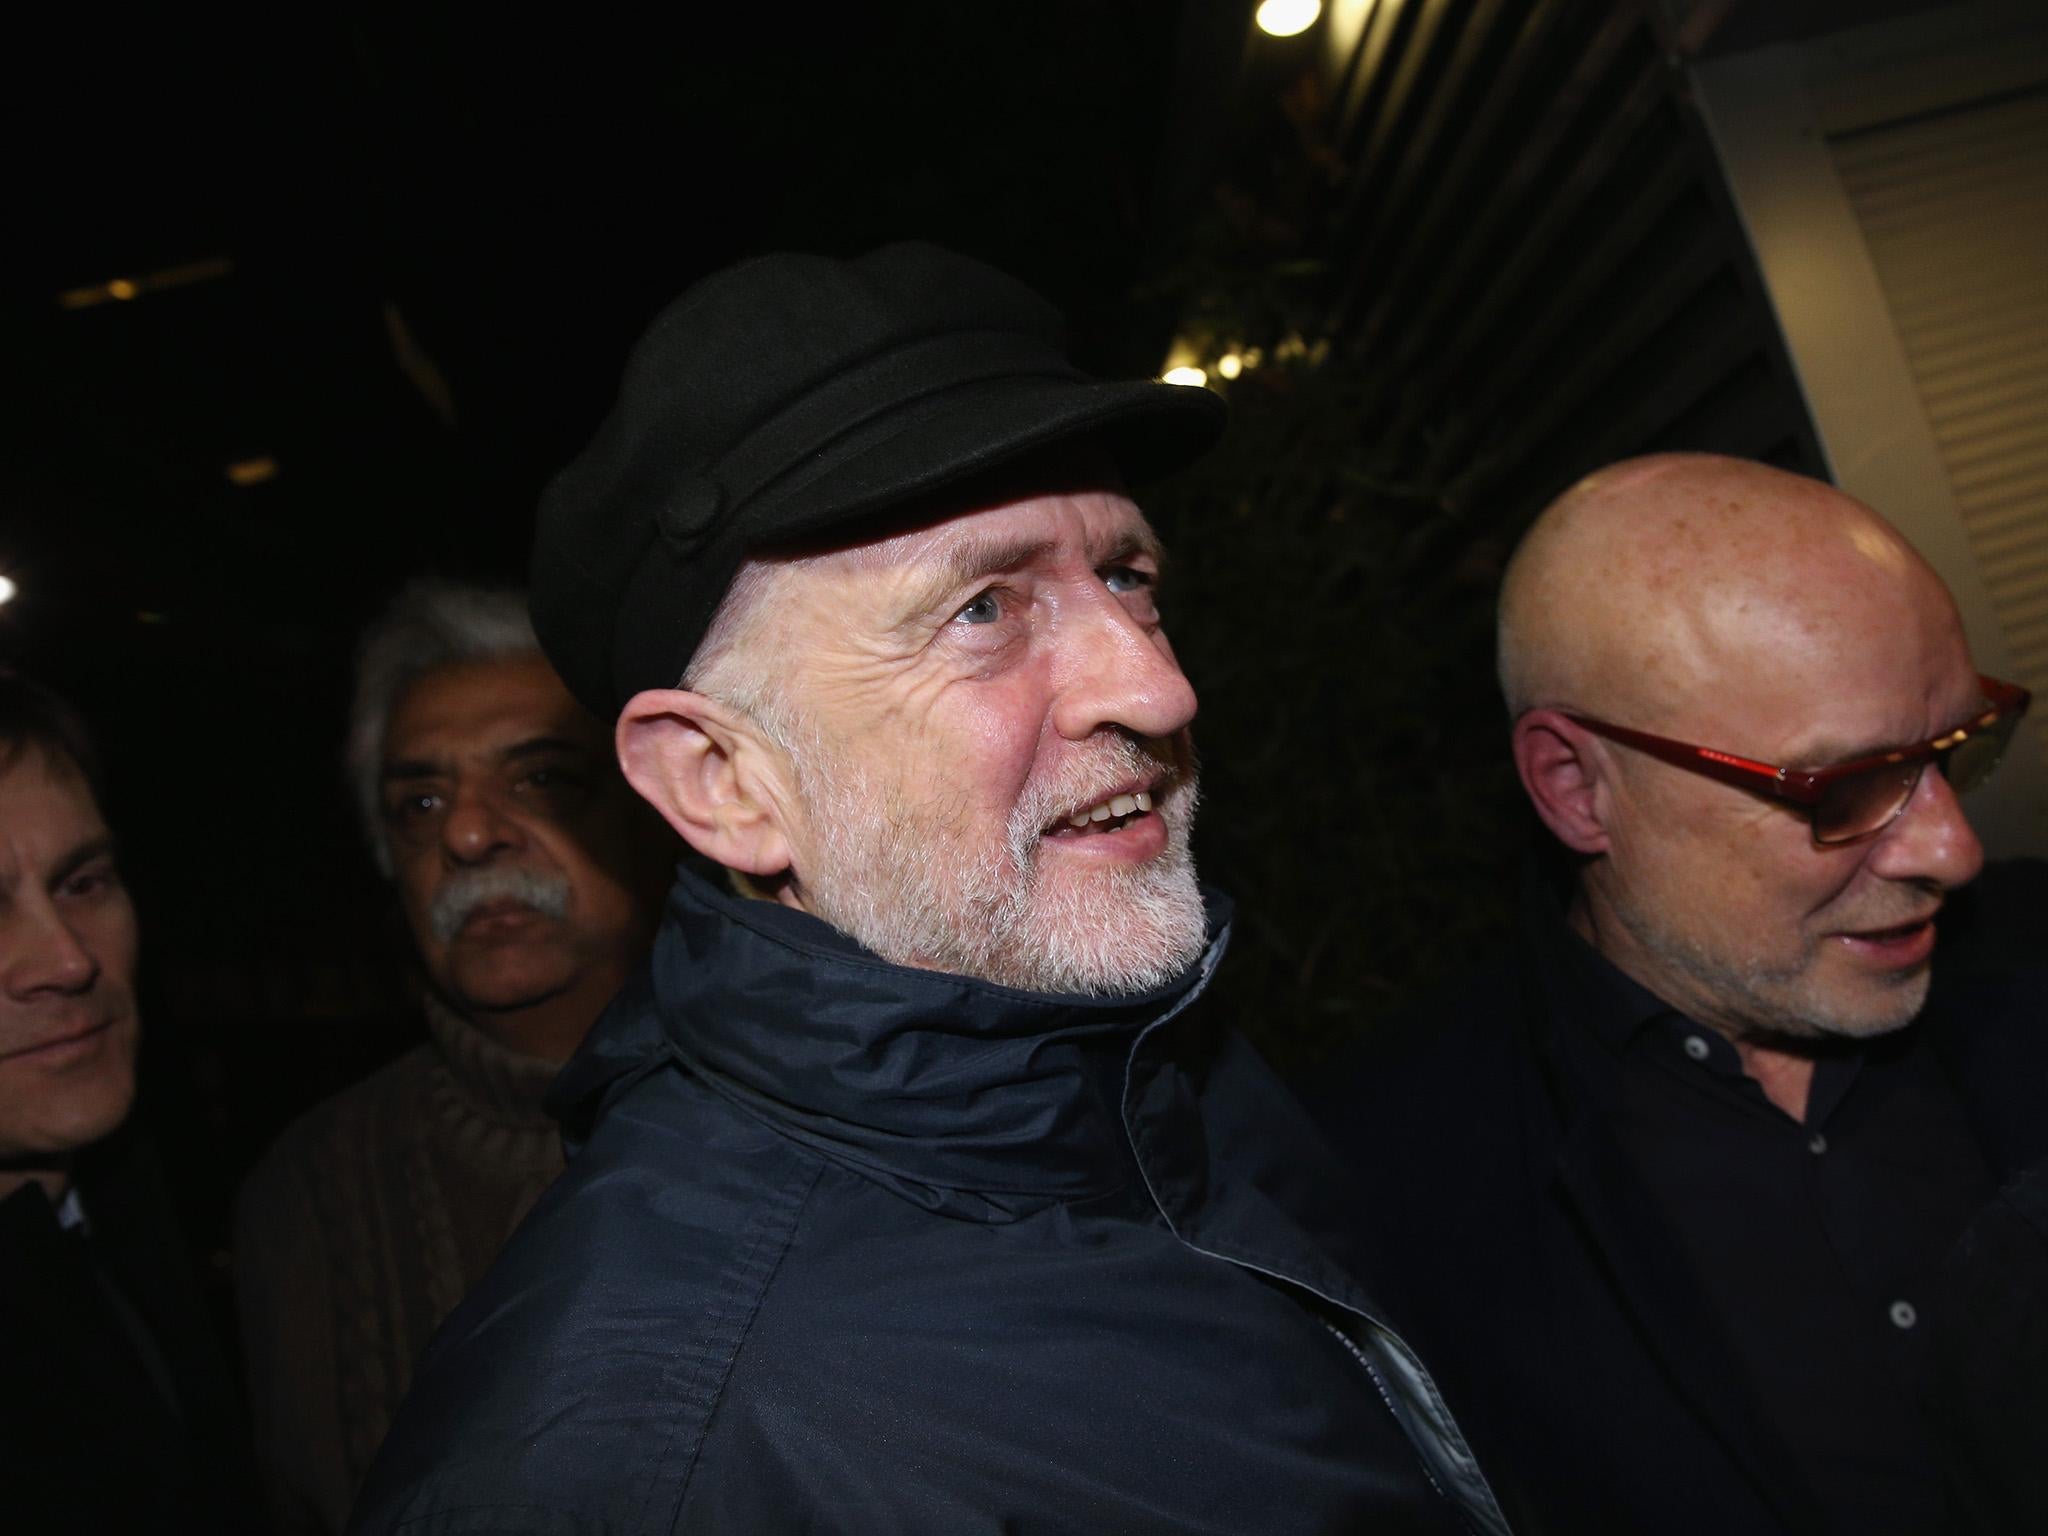 'Jeremy Corbyn has managed to do what no other politician has done'